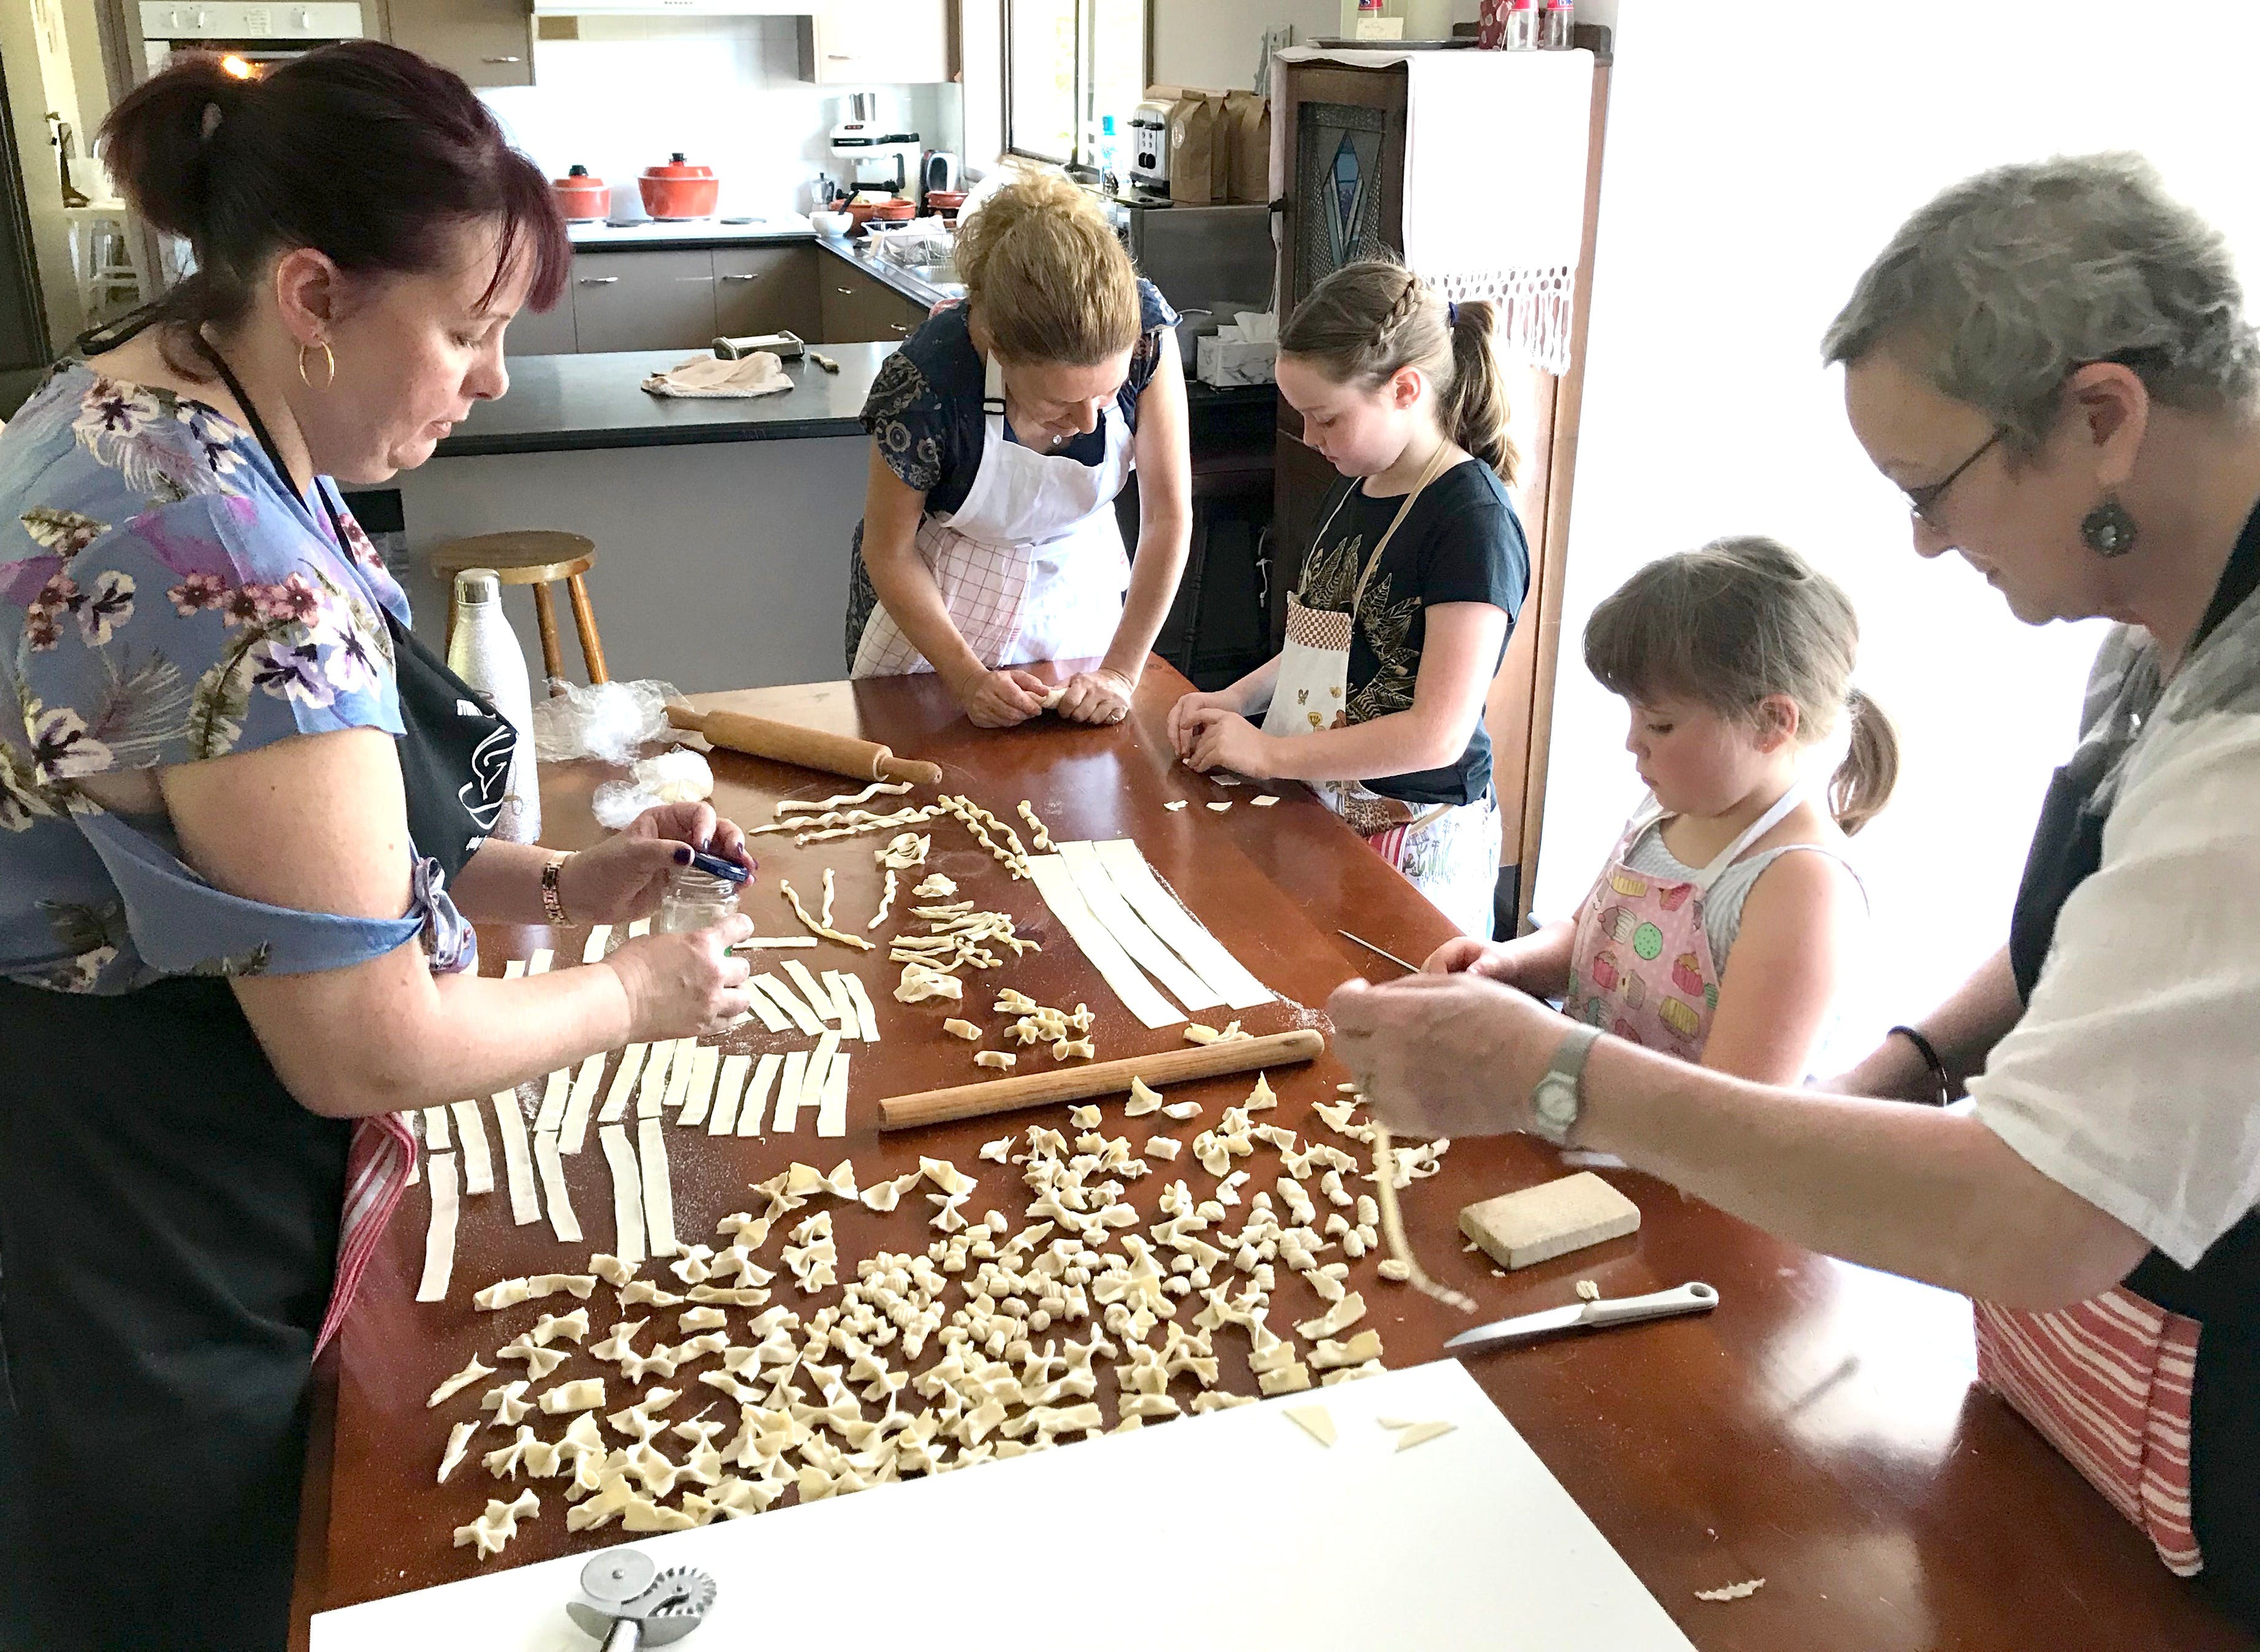 Kids Pasta Making Class - hands on fun at your house - Carnarvon Accommodation